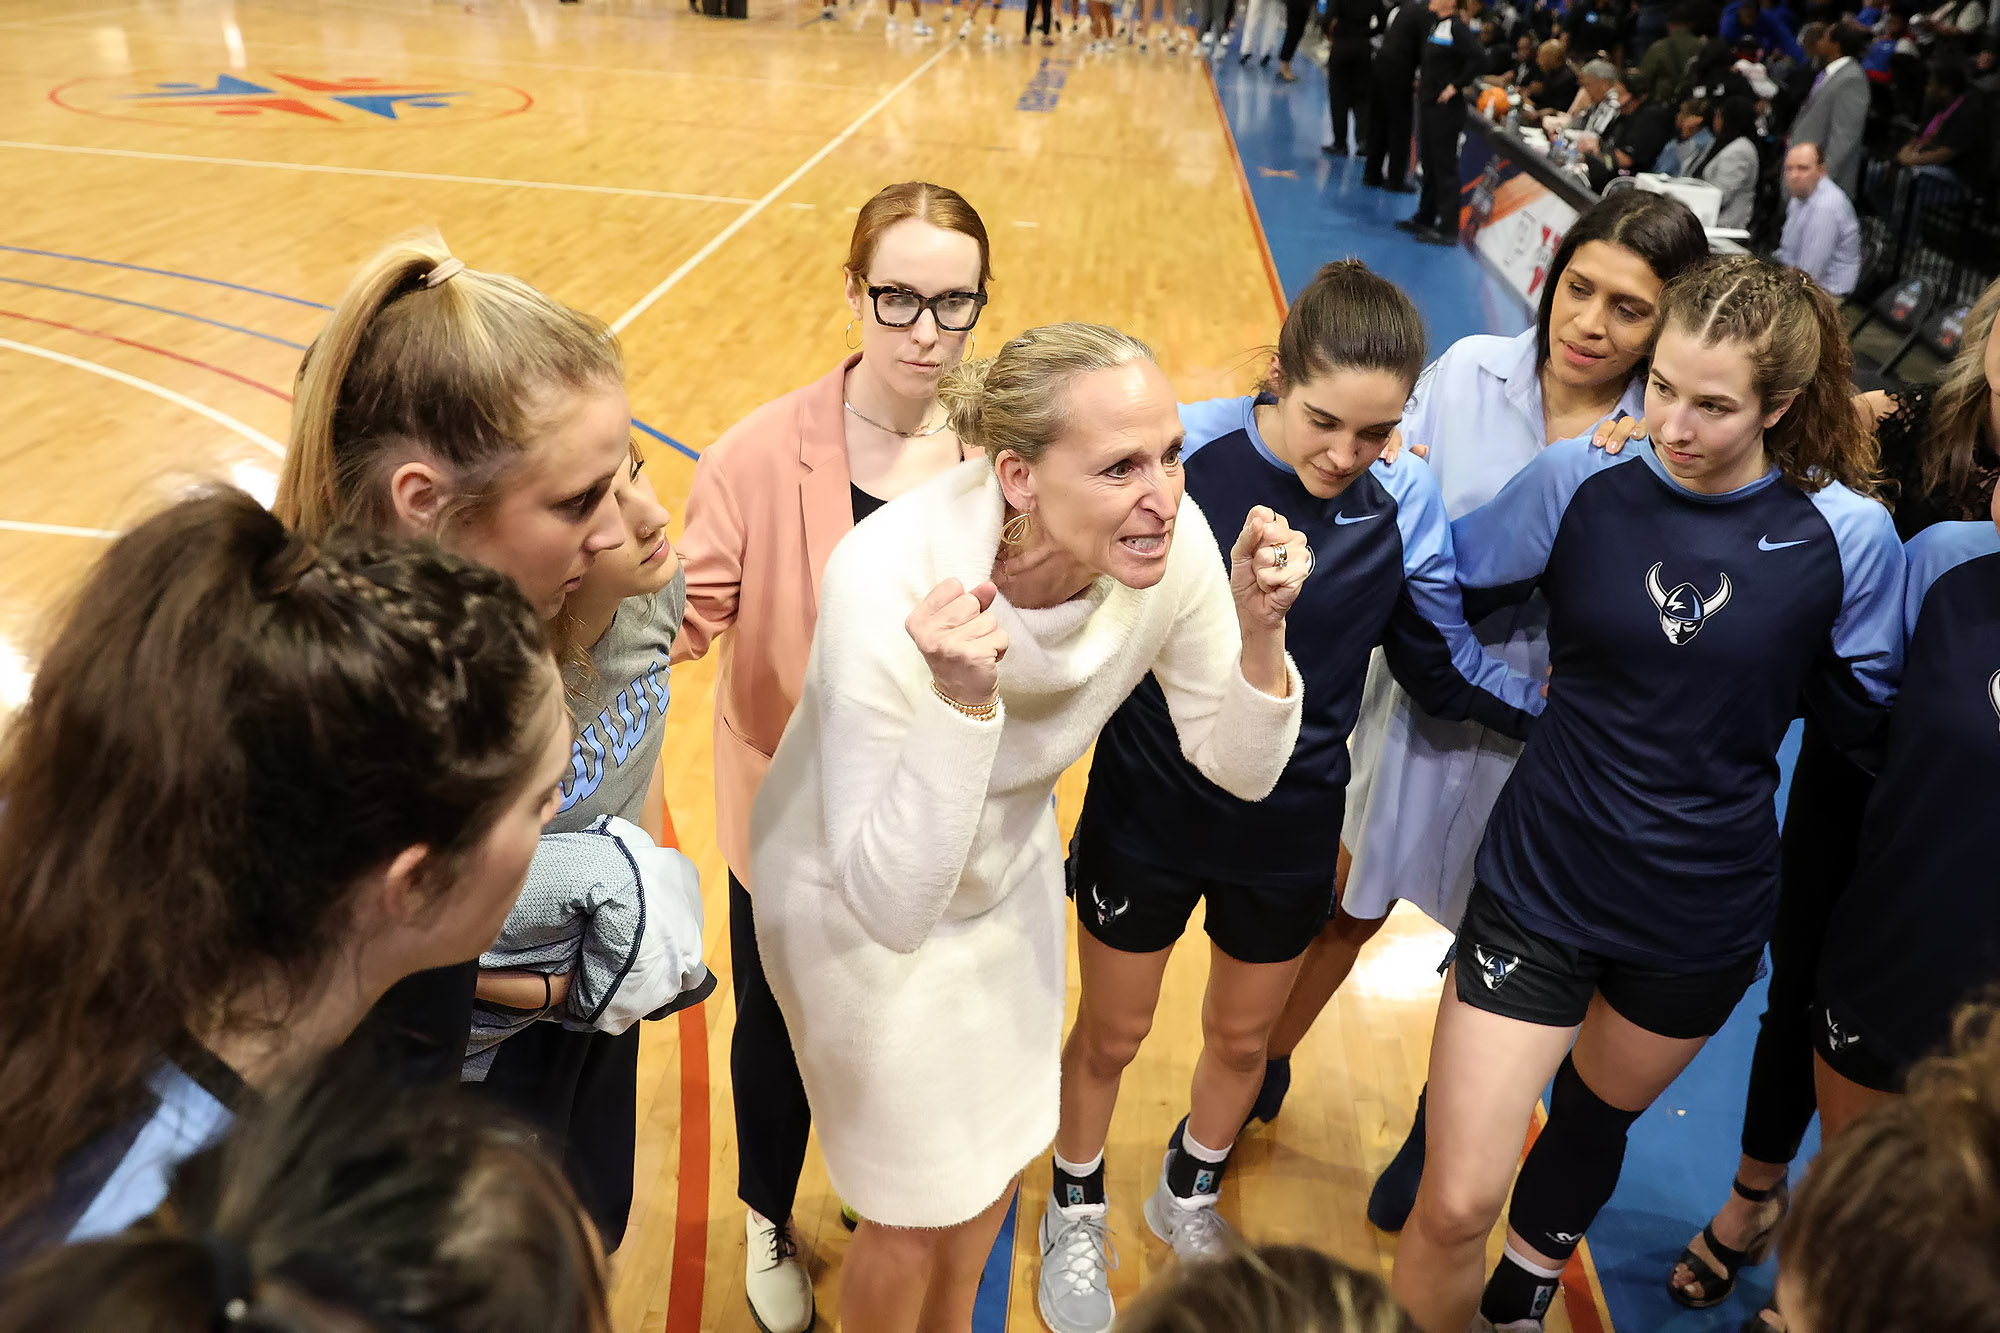 Part II: Western Washington University head coach Carmen Dolfo huddles with her basketball team before the NCAA Division II Elite 8 game against Glenville State on March 23.